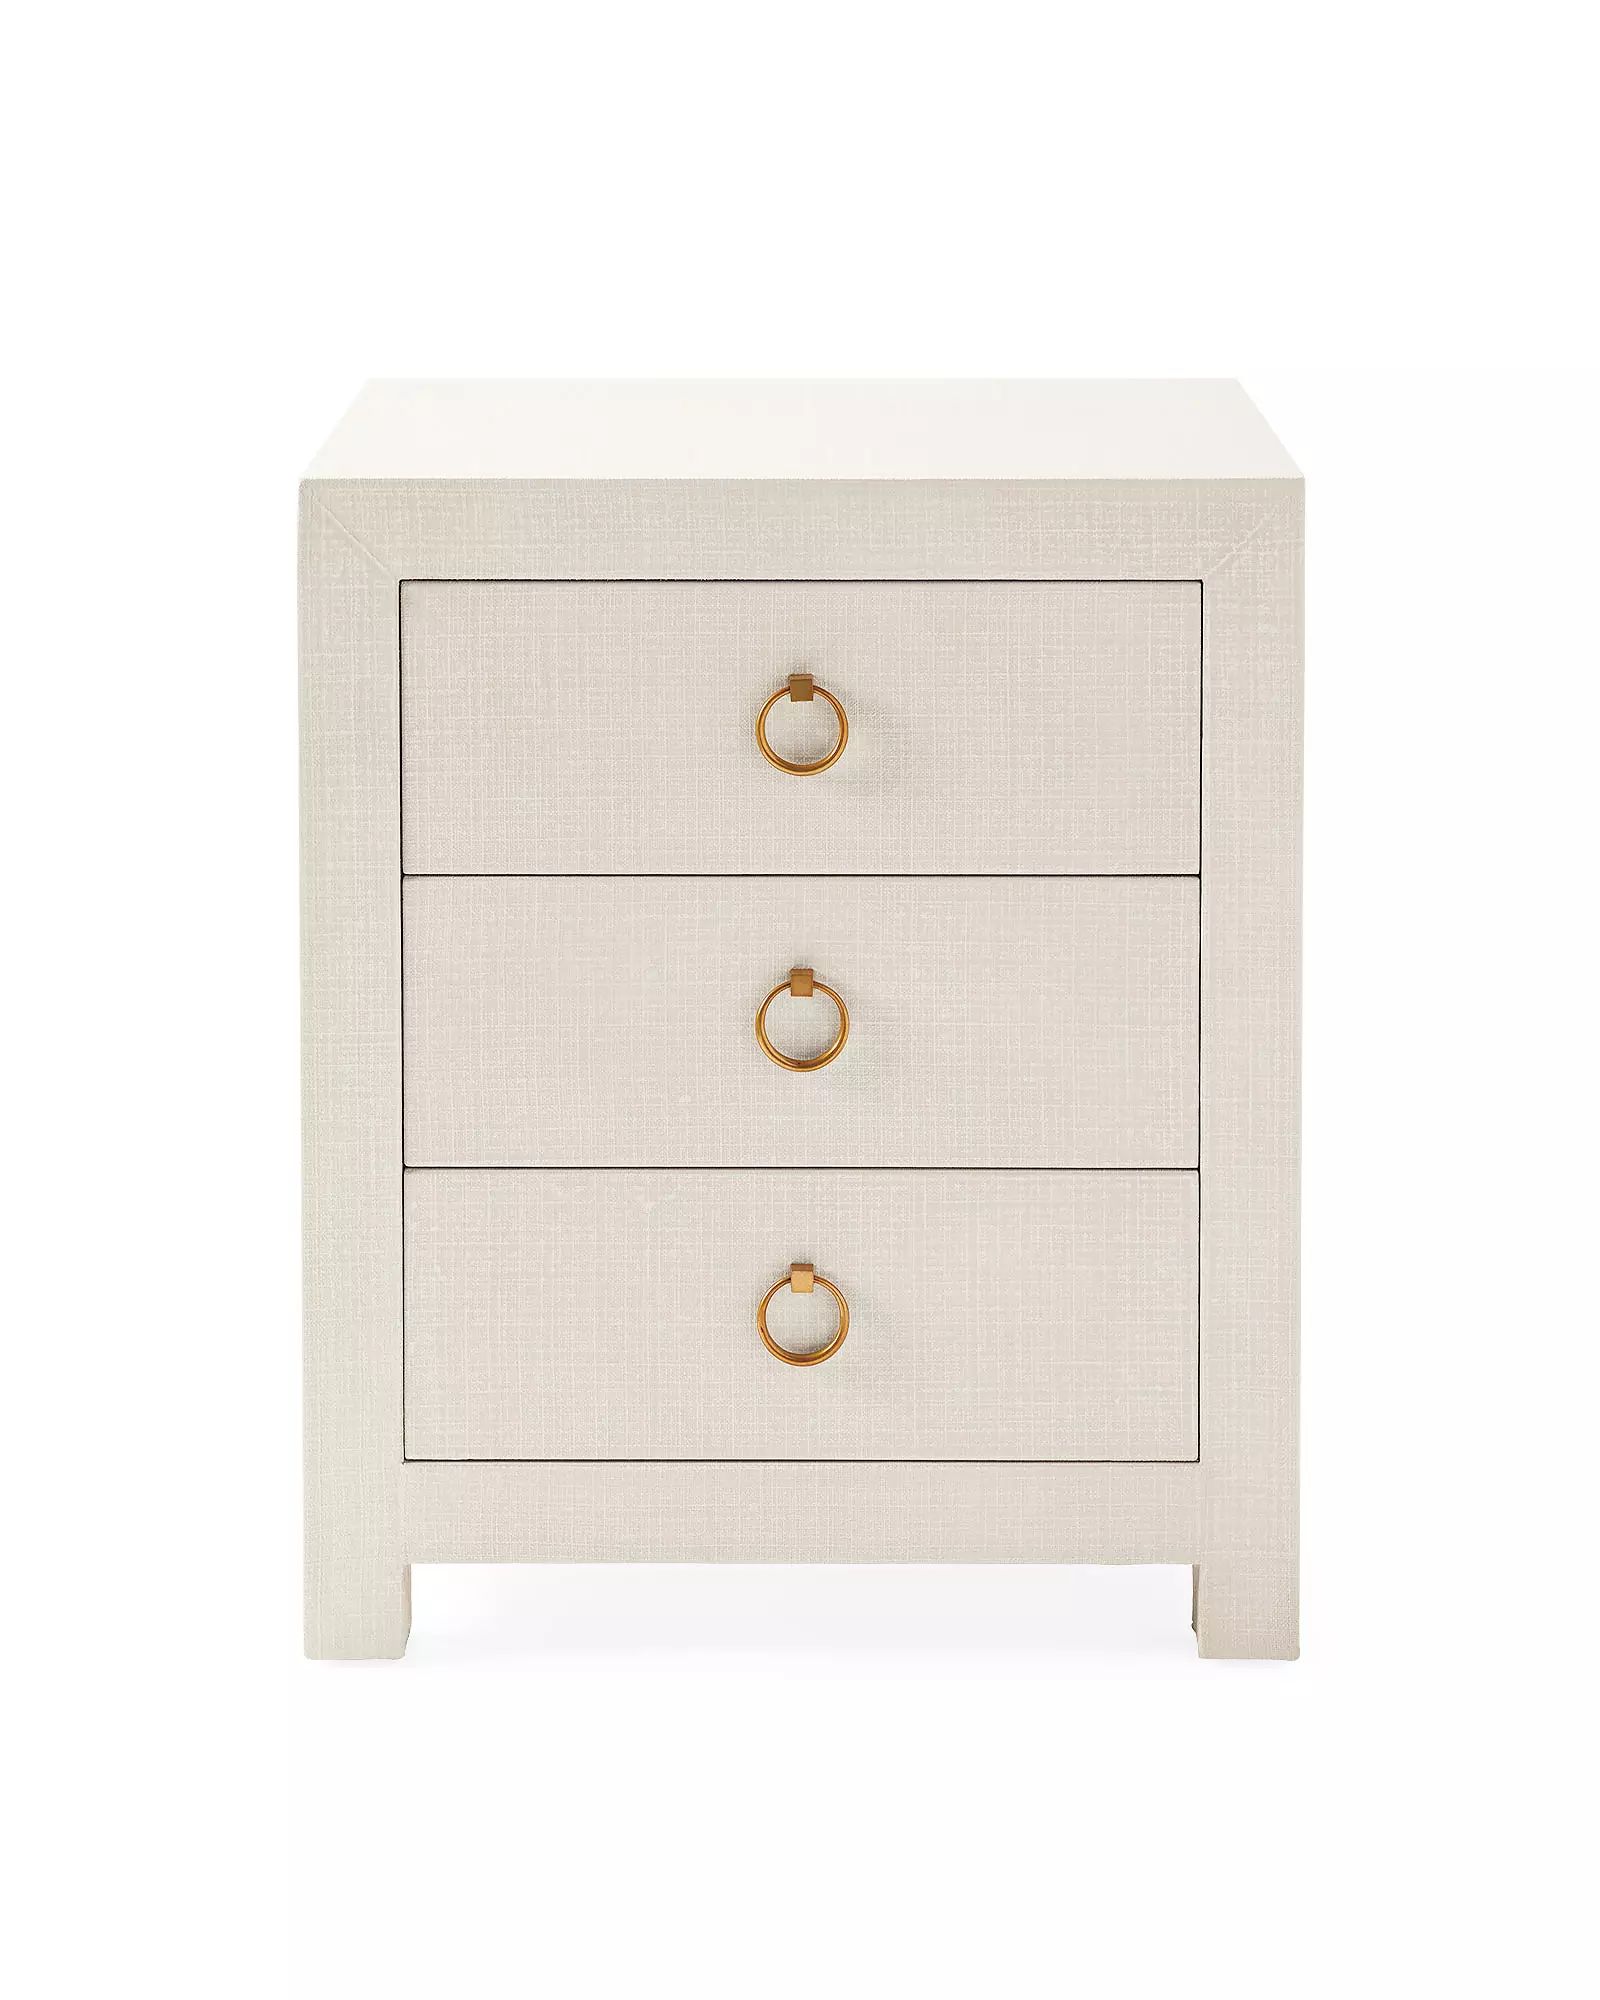 Driftway 3-Drawer Nightstand | Serena and Lily